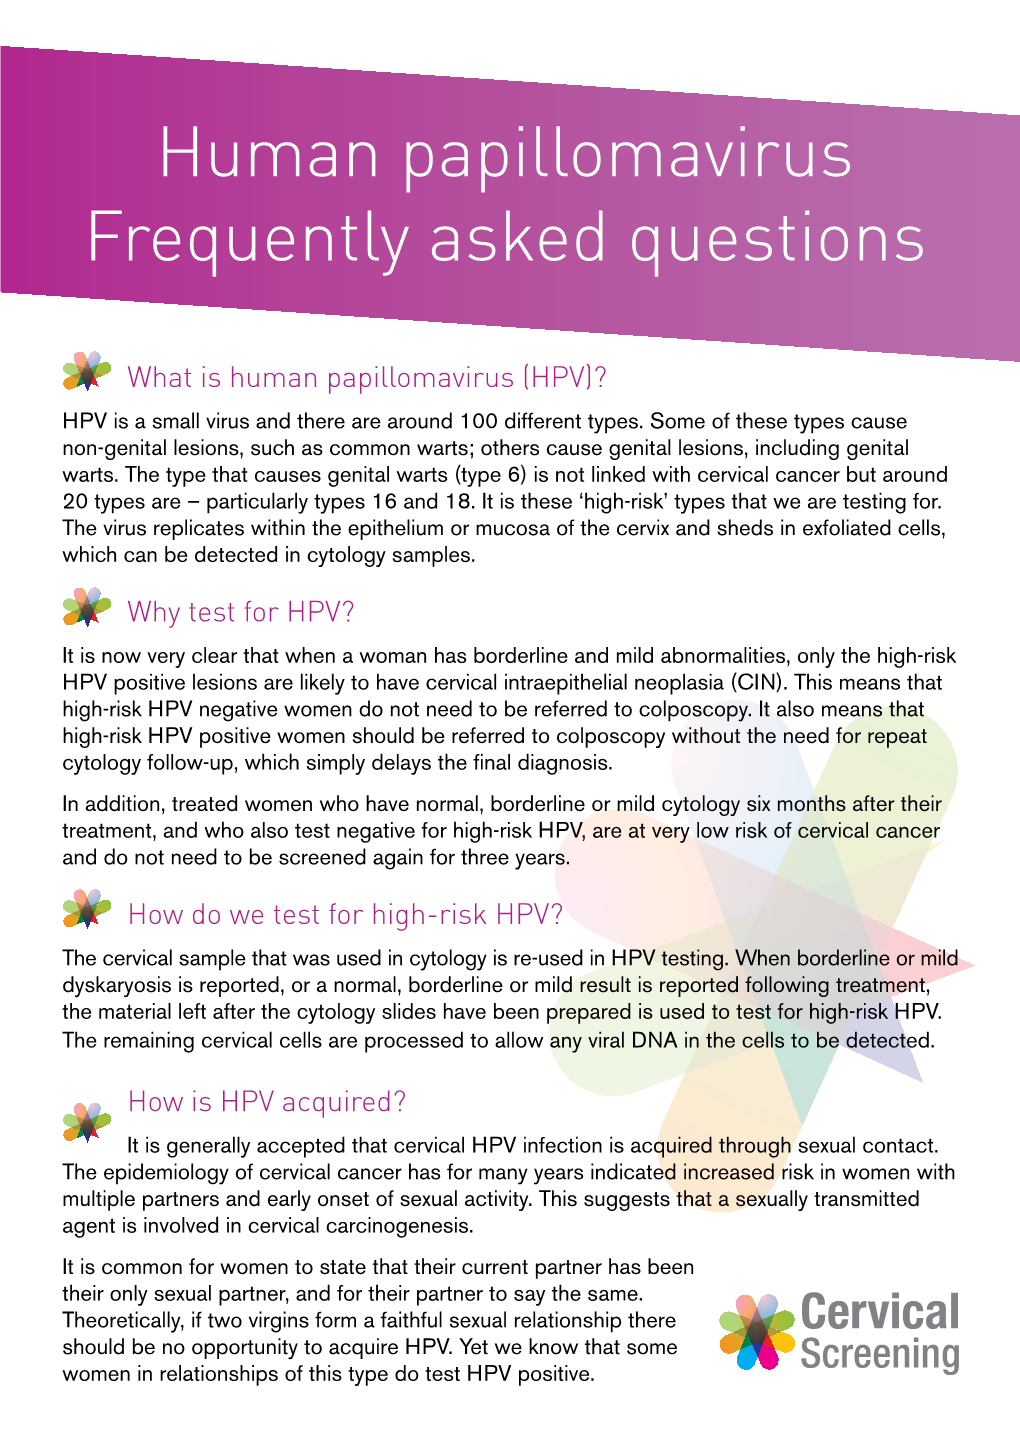 Human Papillomavirus Frequently Asked Questions